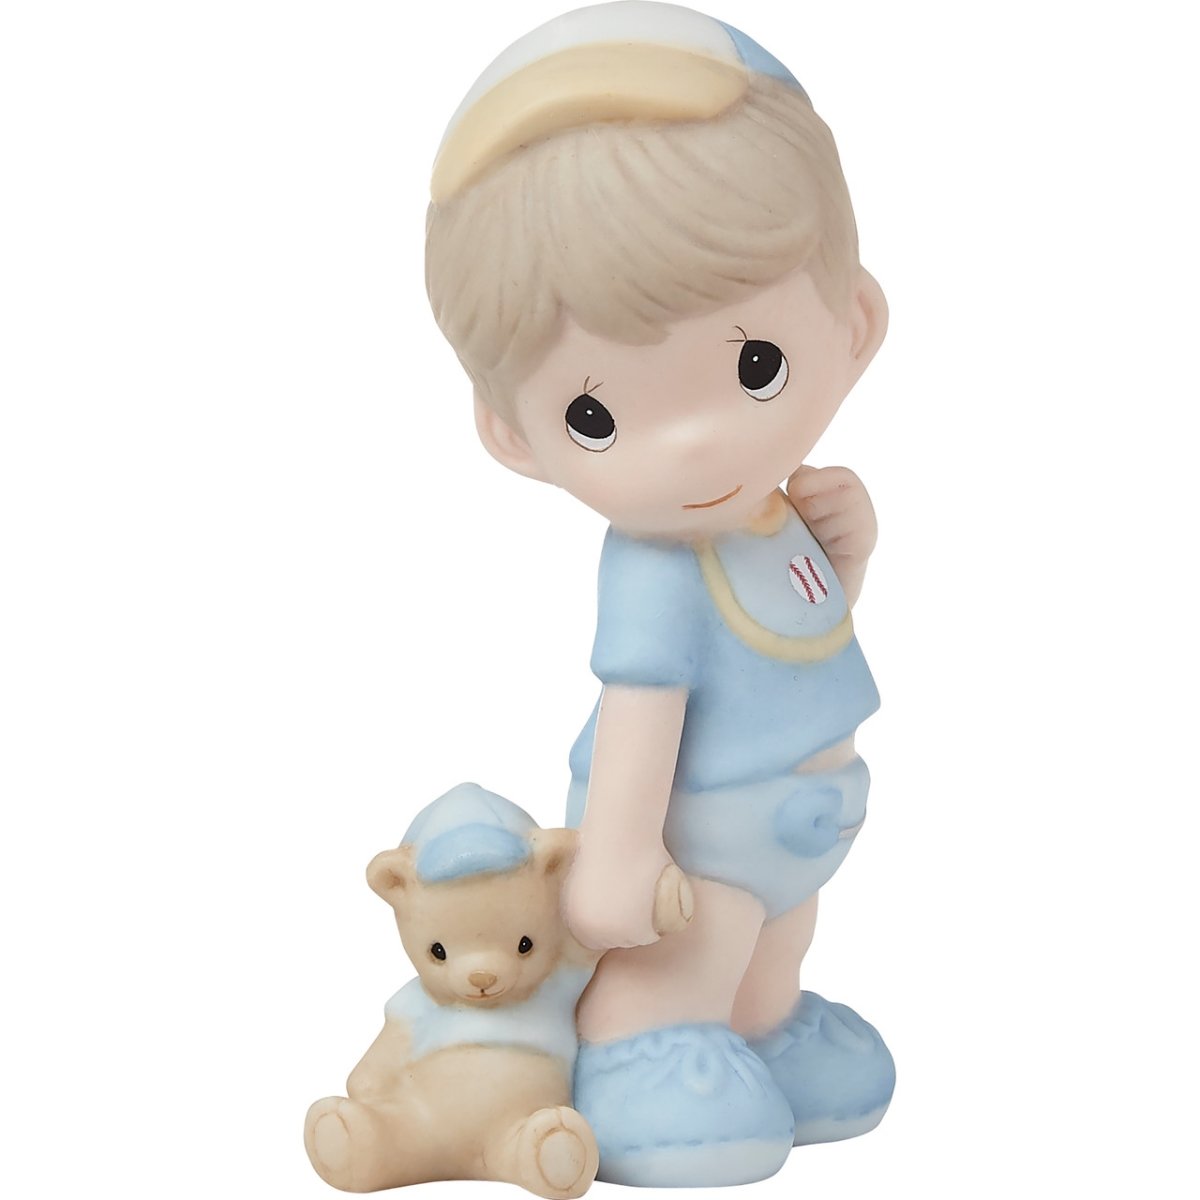 Picture of Be the Light Christian Bookstore 222019 4 in. Porcelain Baby Boy Standing Figurine with Blue Diaper, Multi Color